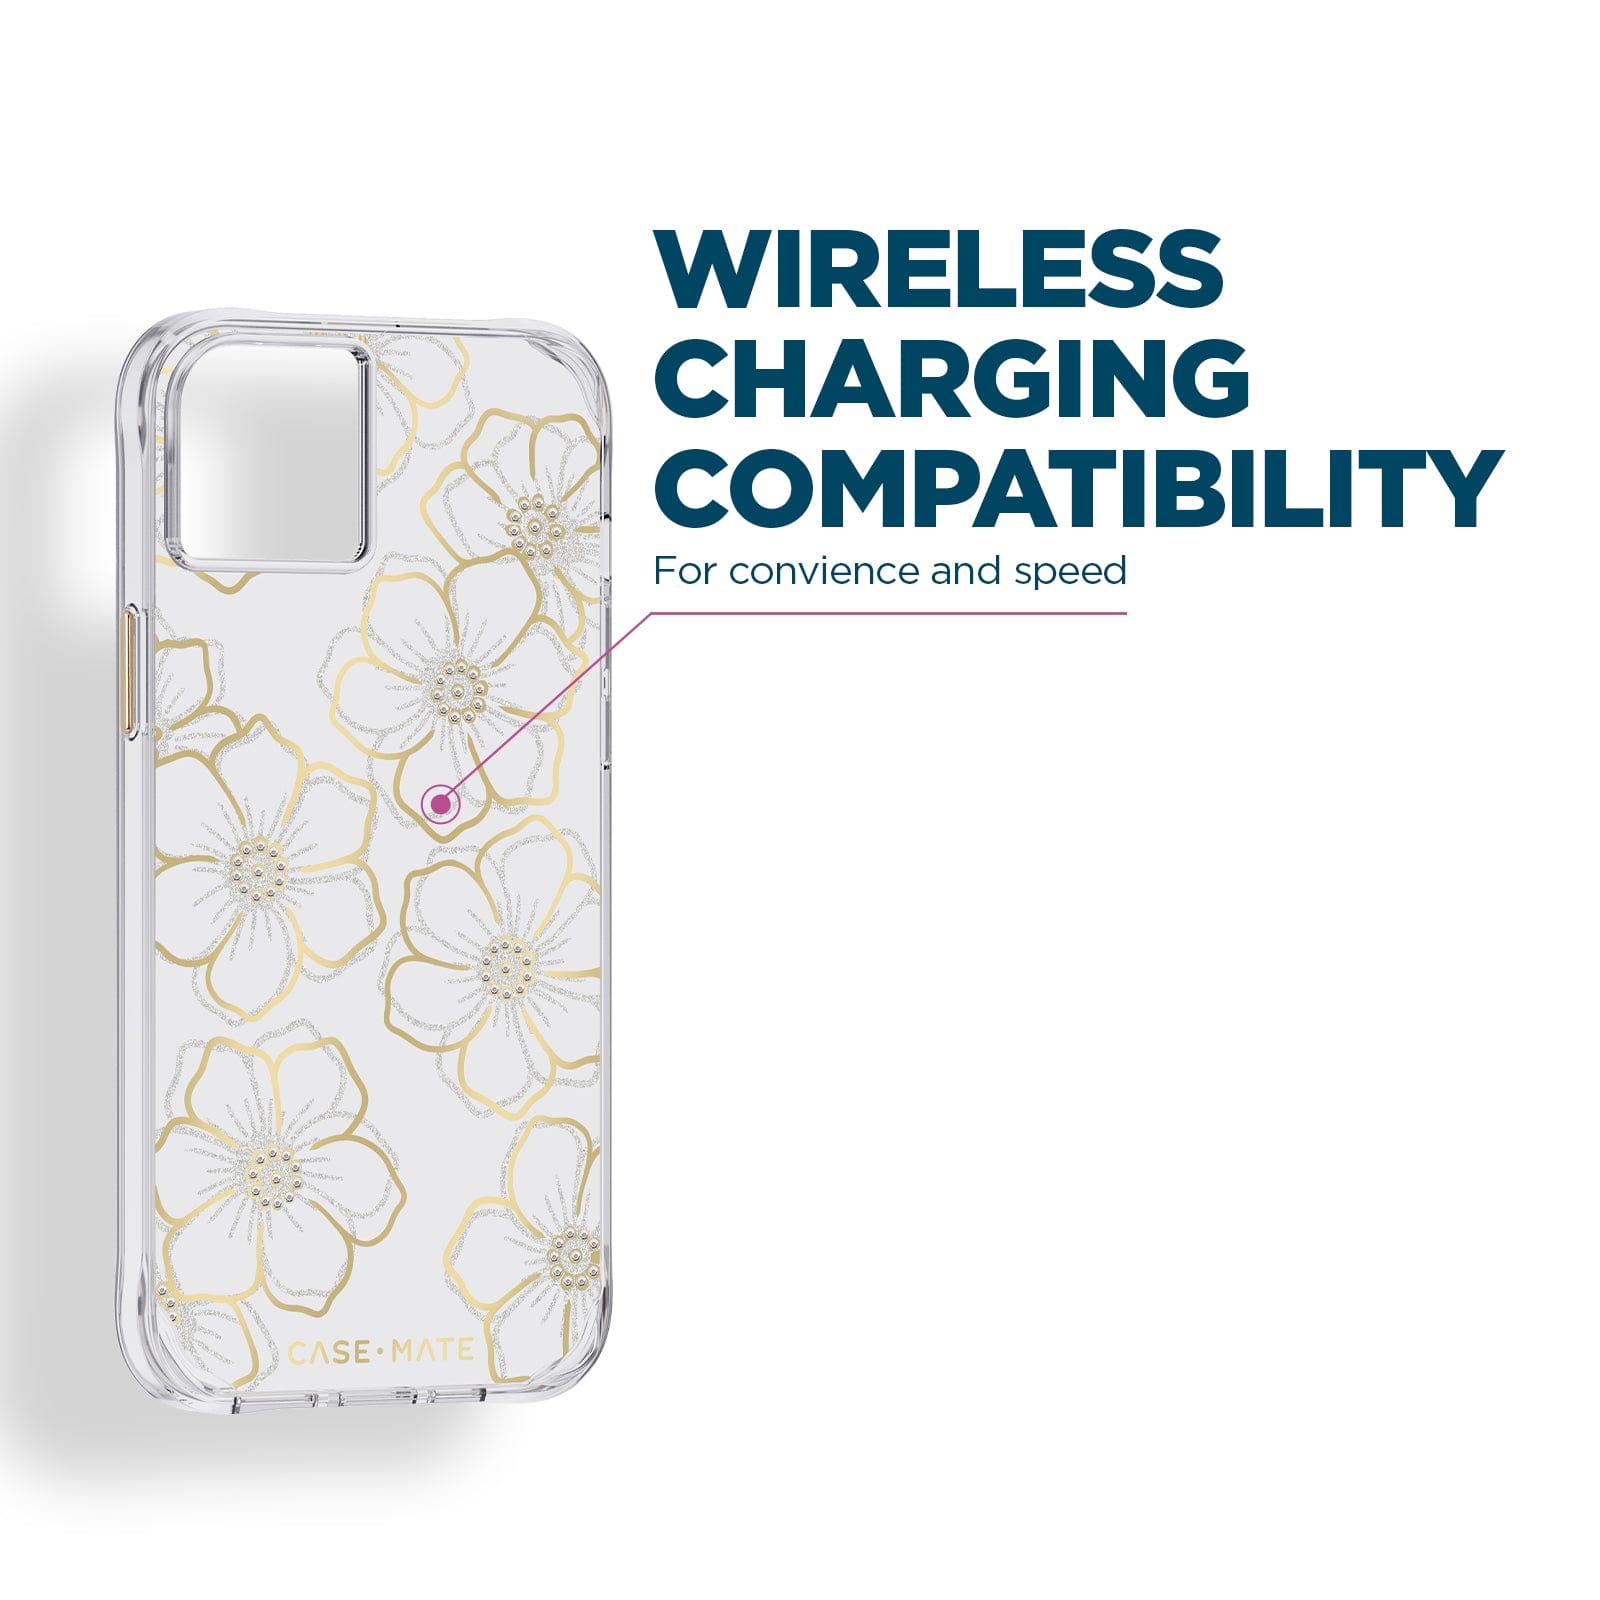 Wireless Charging Compatibility for convenience and speed